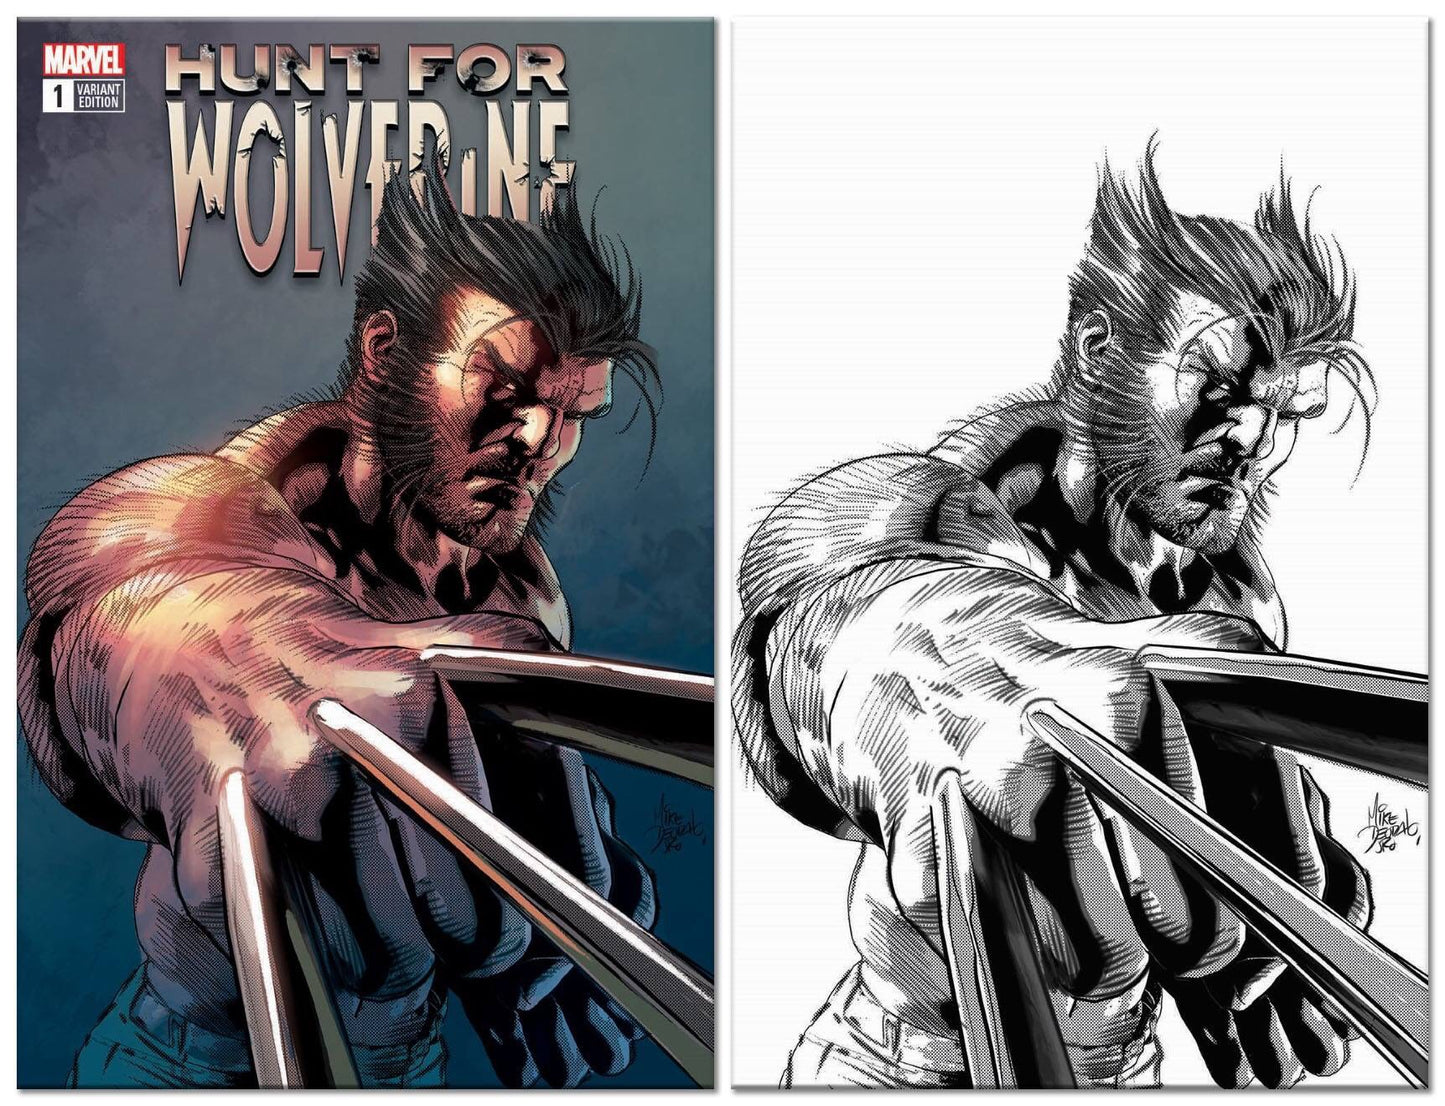 HUNT FOR WOLVERINE #1 MIKE DEODATO TRADE/VIRGIN VARIANT SET LIMITED TO 1000